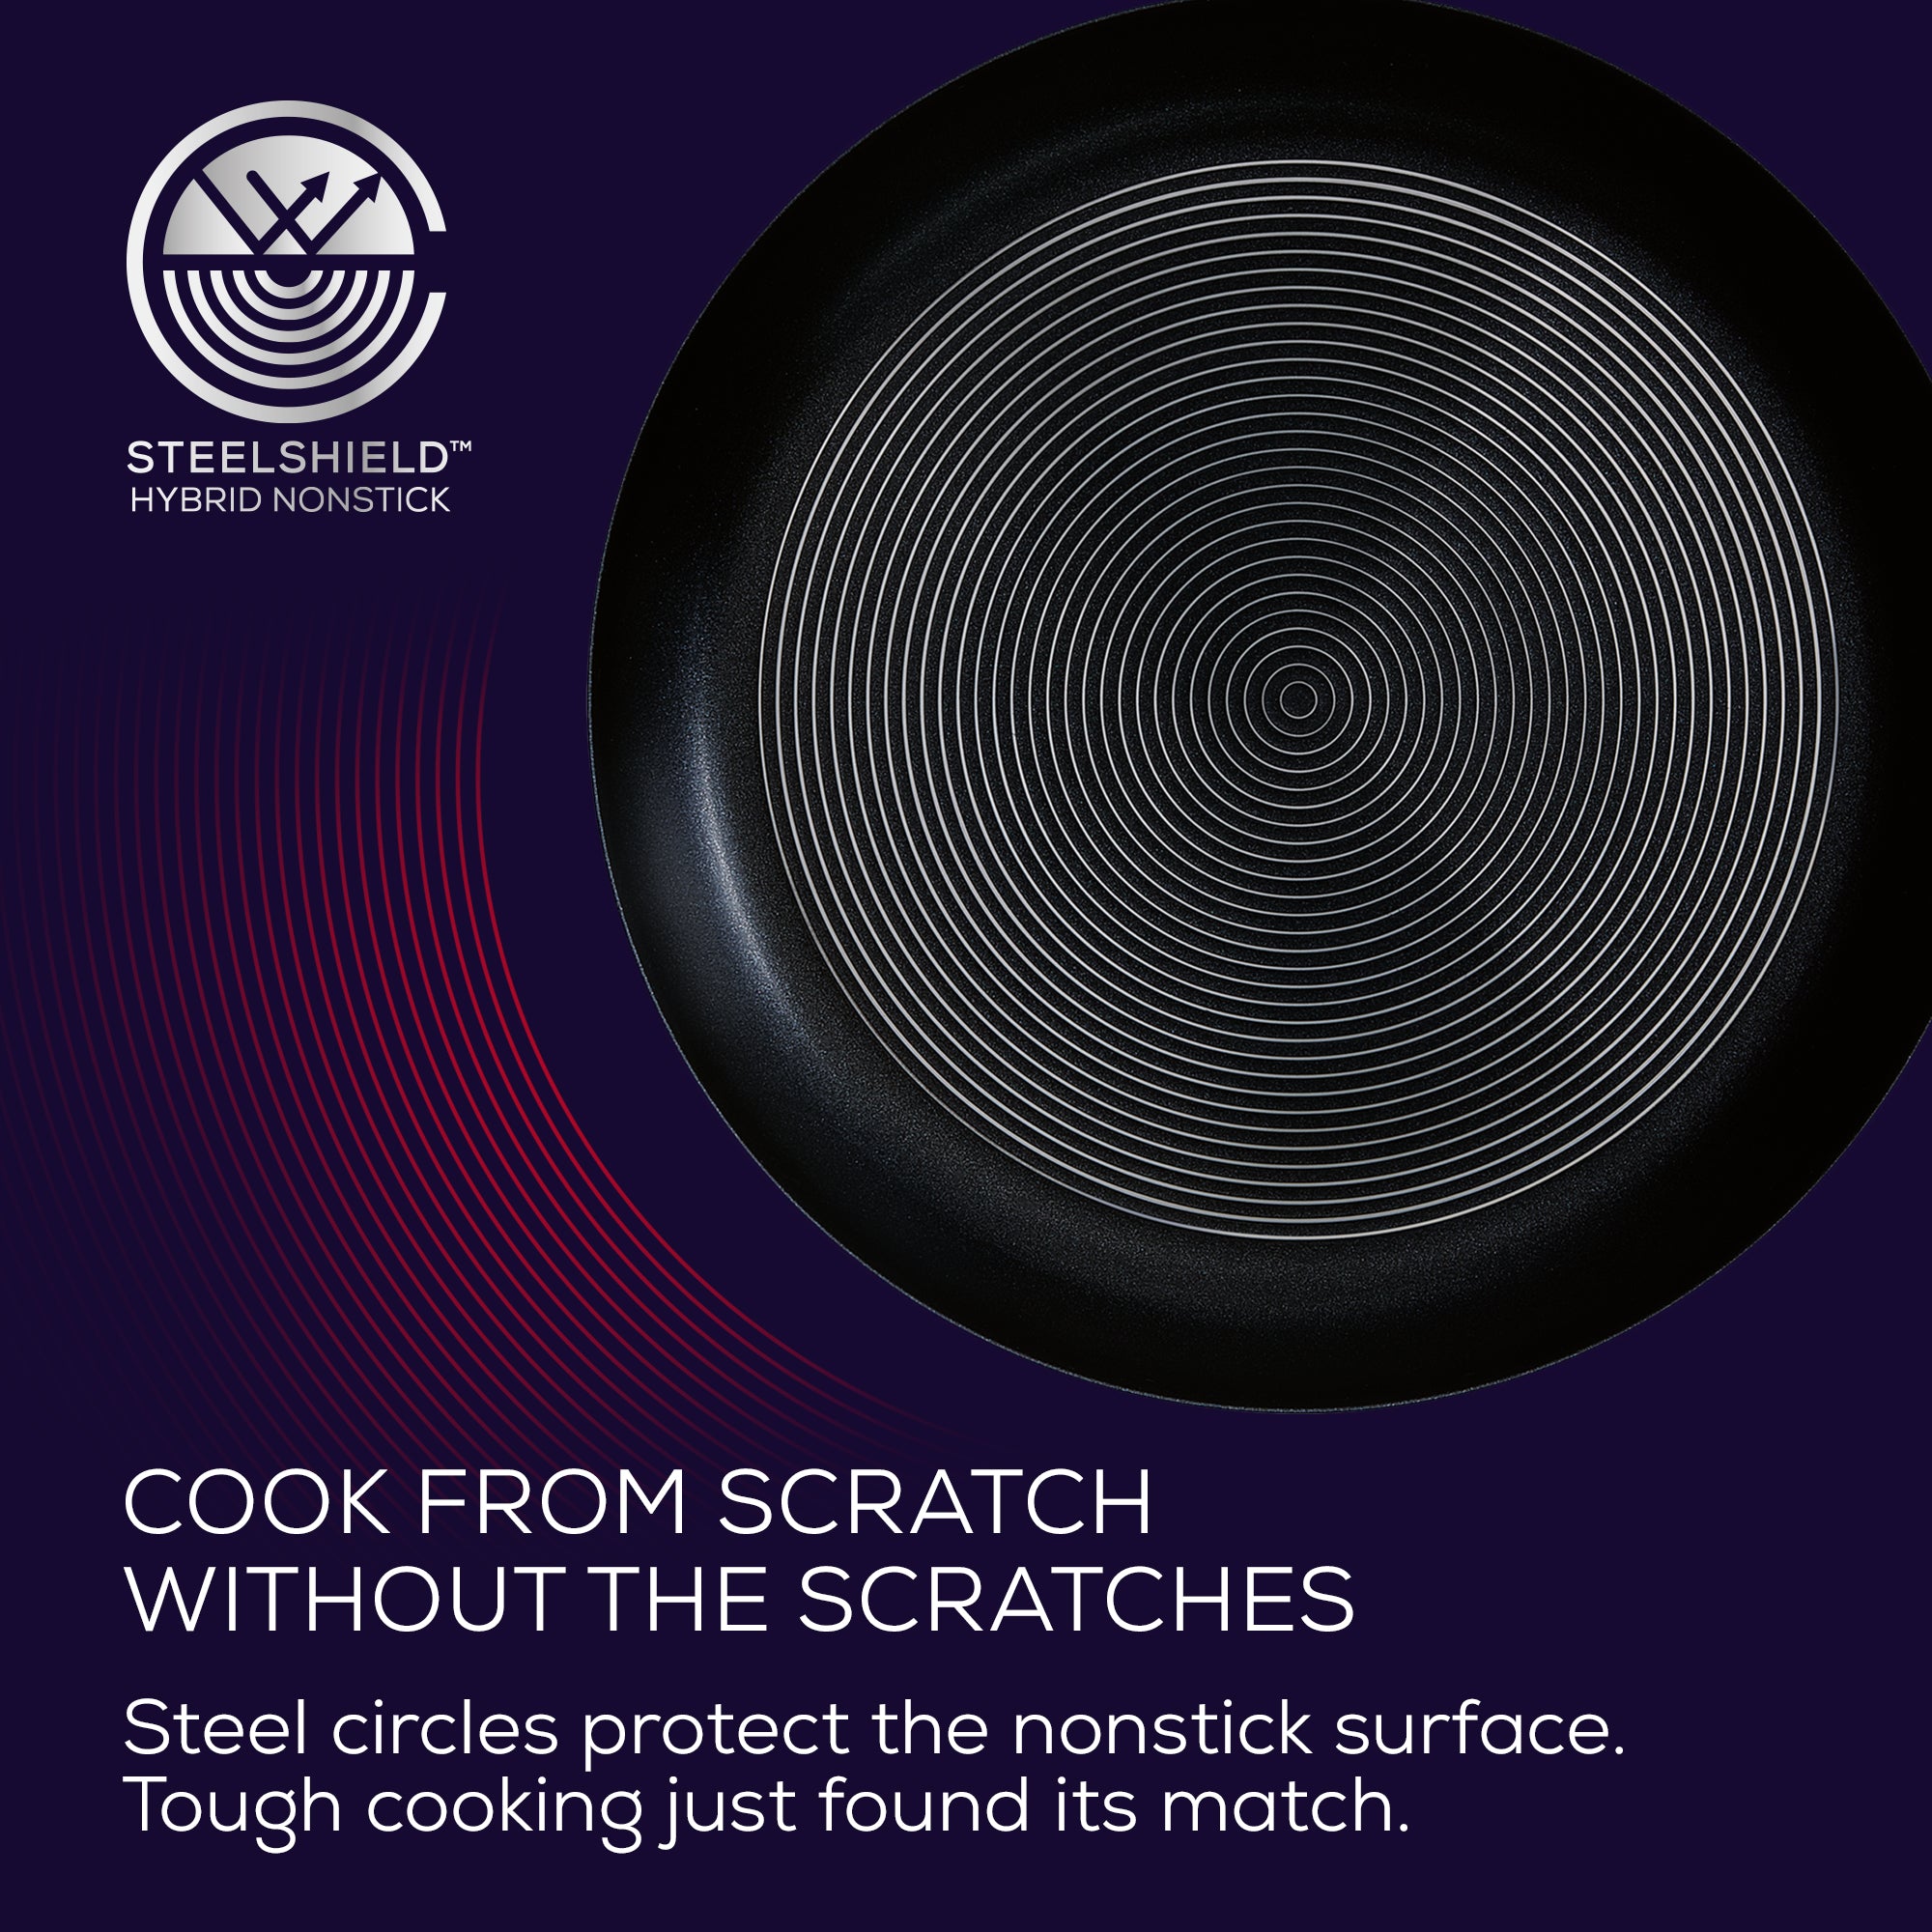 Stainless steel nonstick sauté pan from Circulon's SteelShield cookware range.  Cooks like steel, cleans like nonstick.